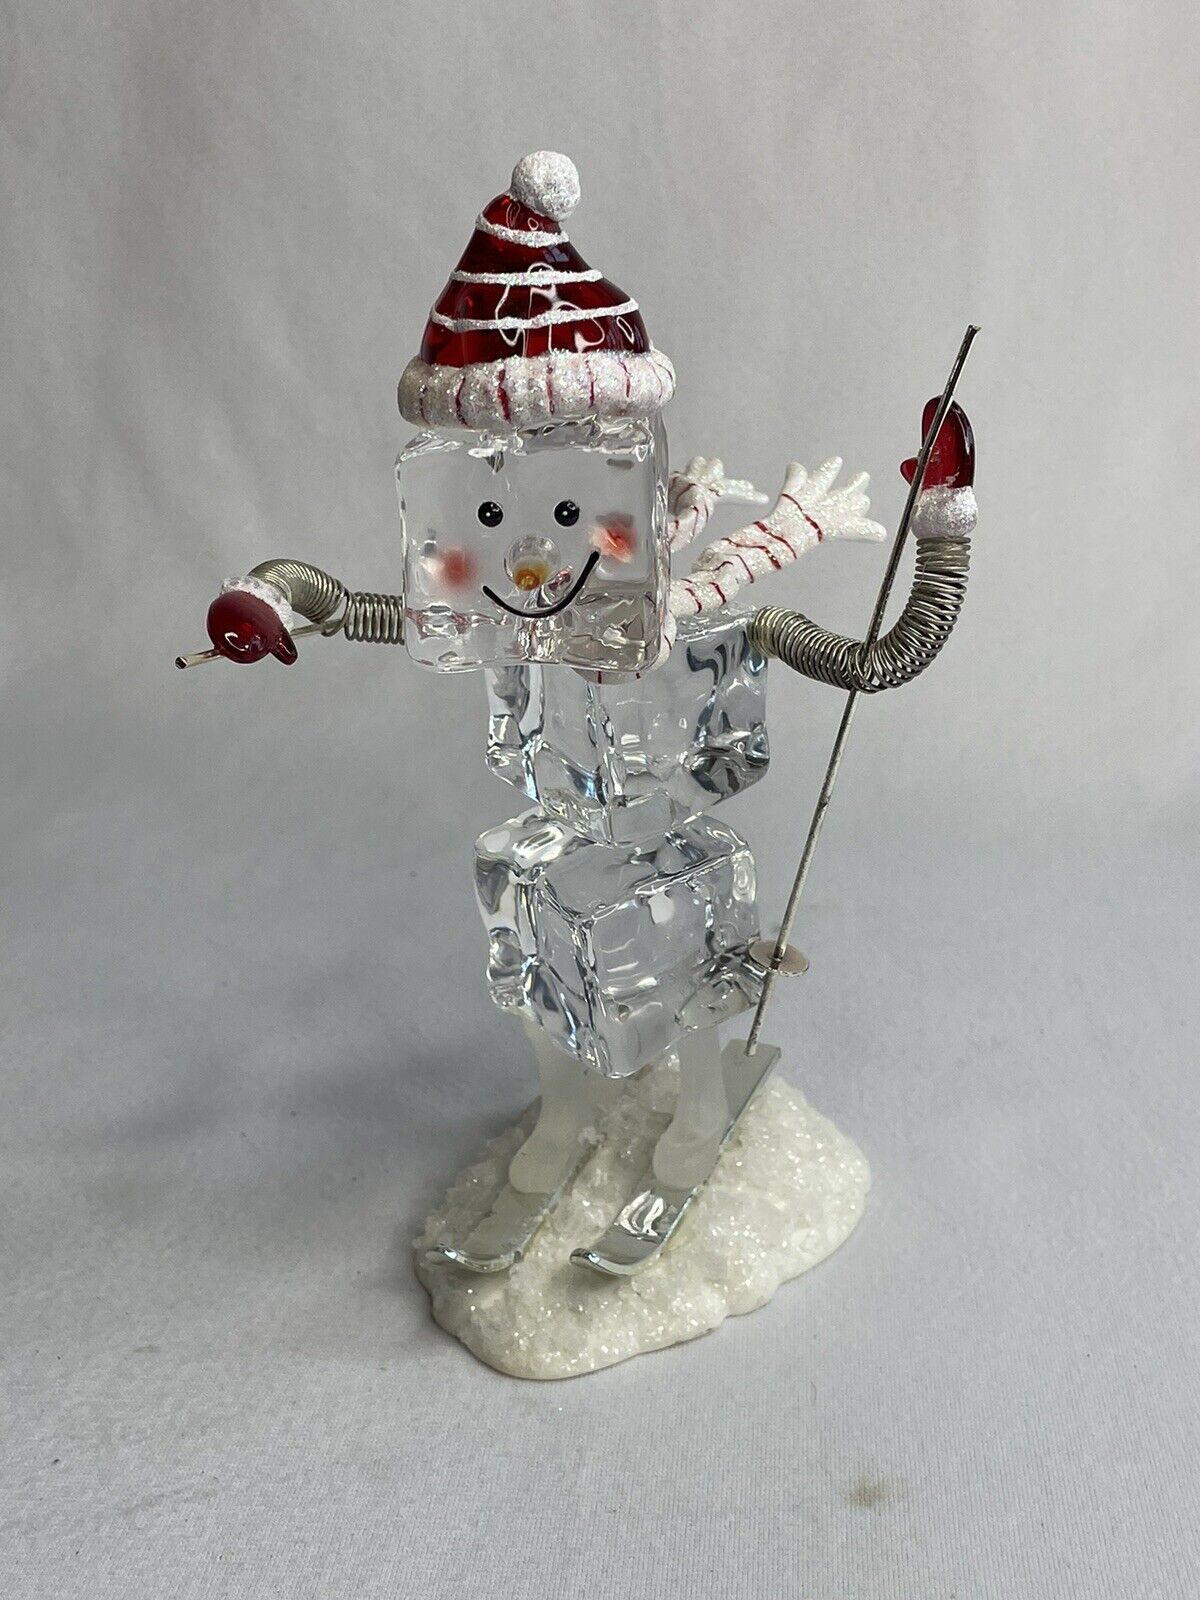 Department Dept 56 Ice Cube Snowman Skiing Figure Statue Christmas Holiday Decor